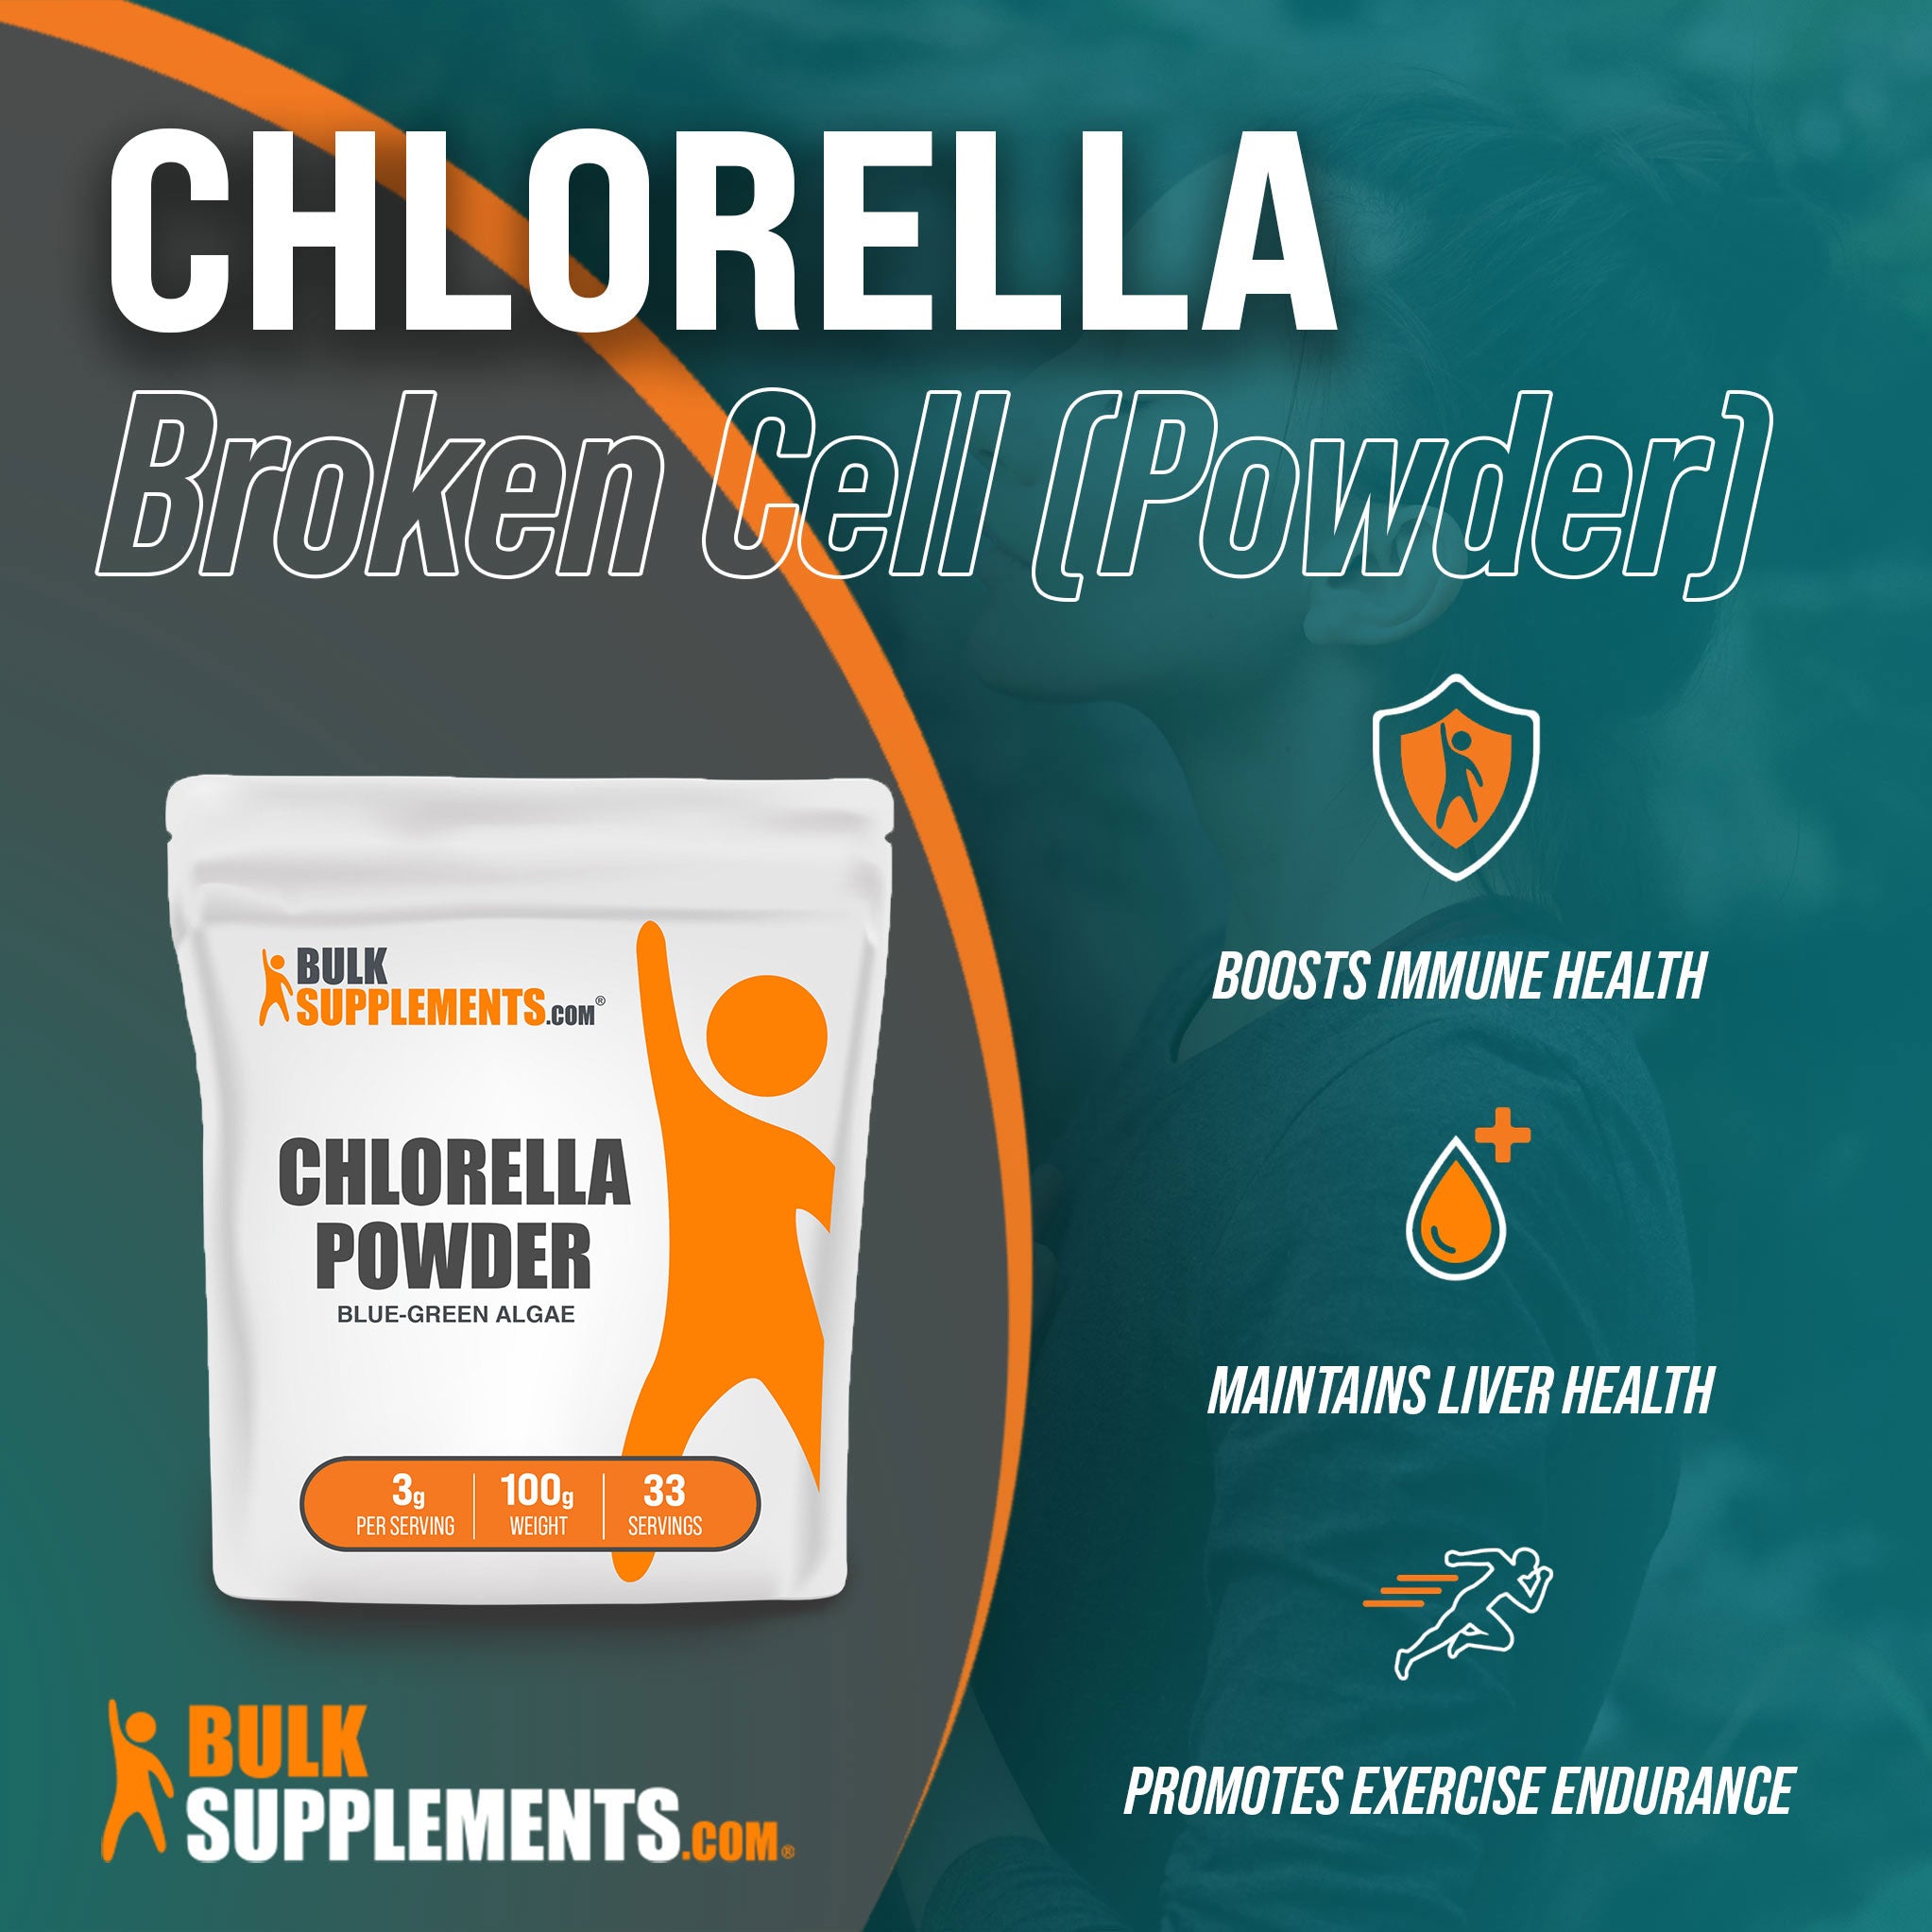 Benefits of 100g Chlorella greens superfood powder; boosts immune health, maintains liver health, promotes exercise endurance